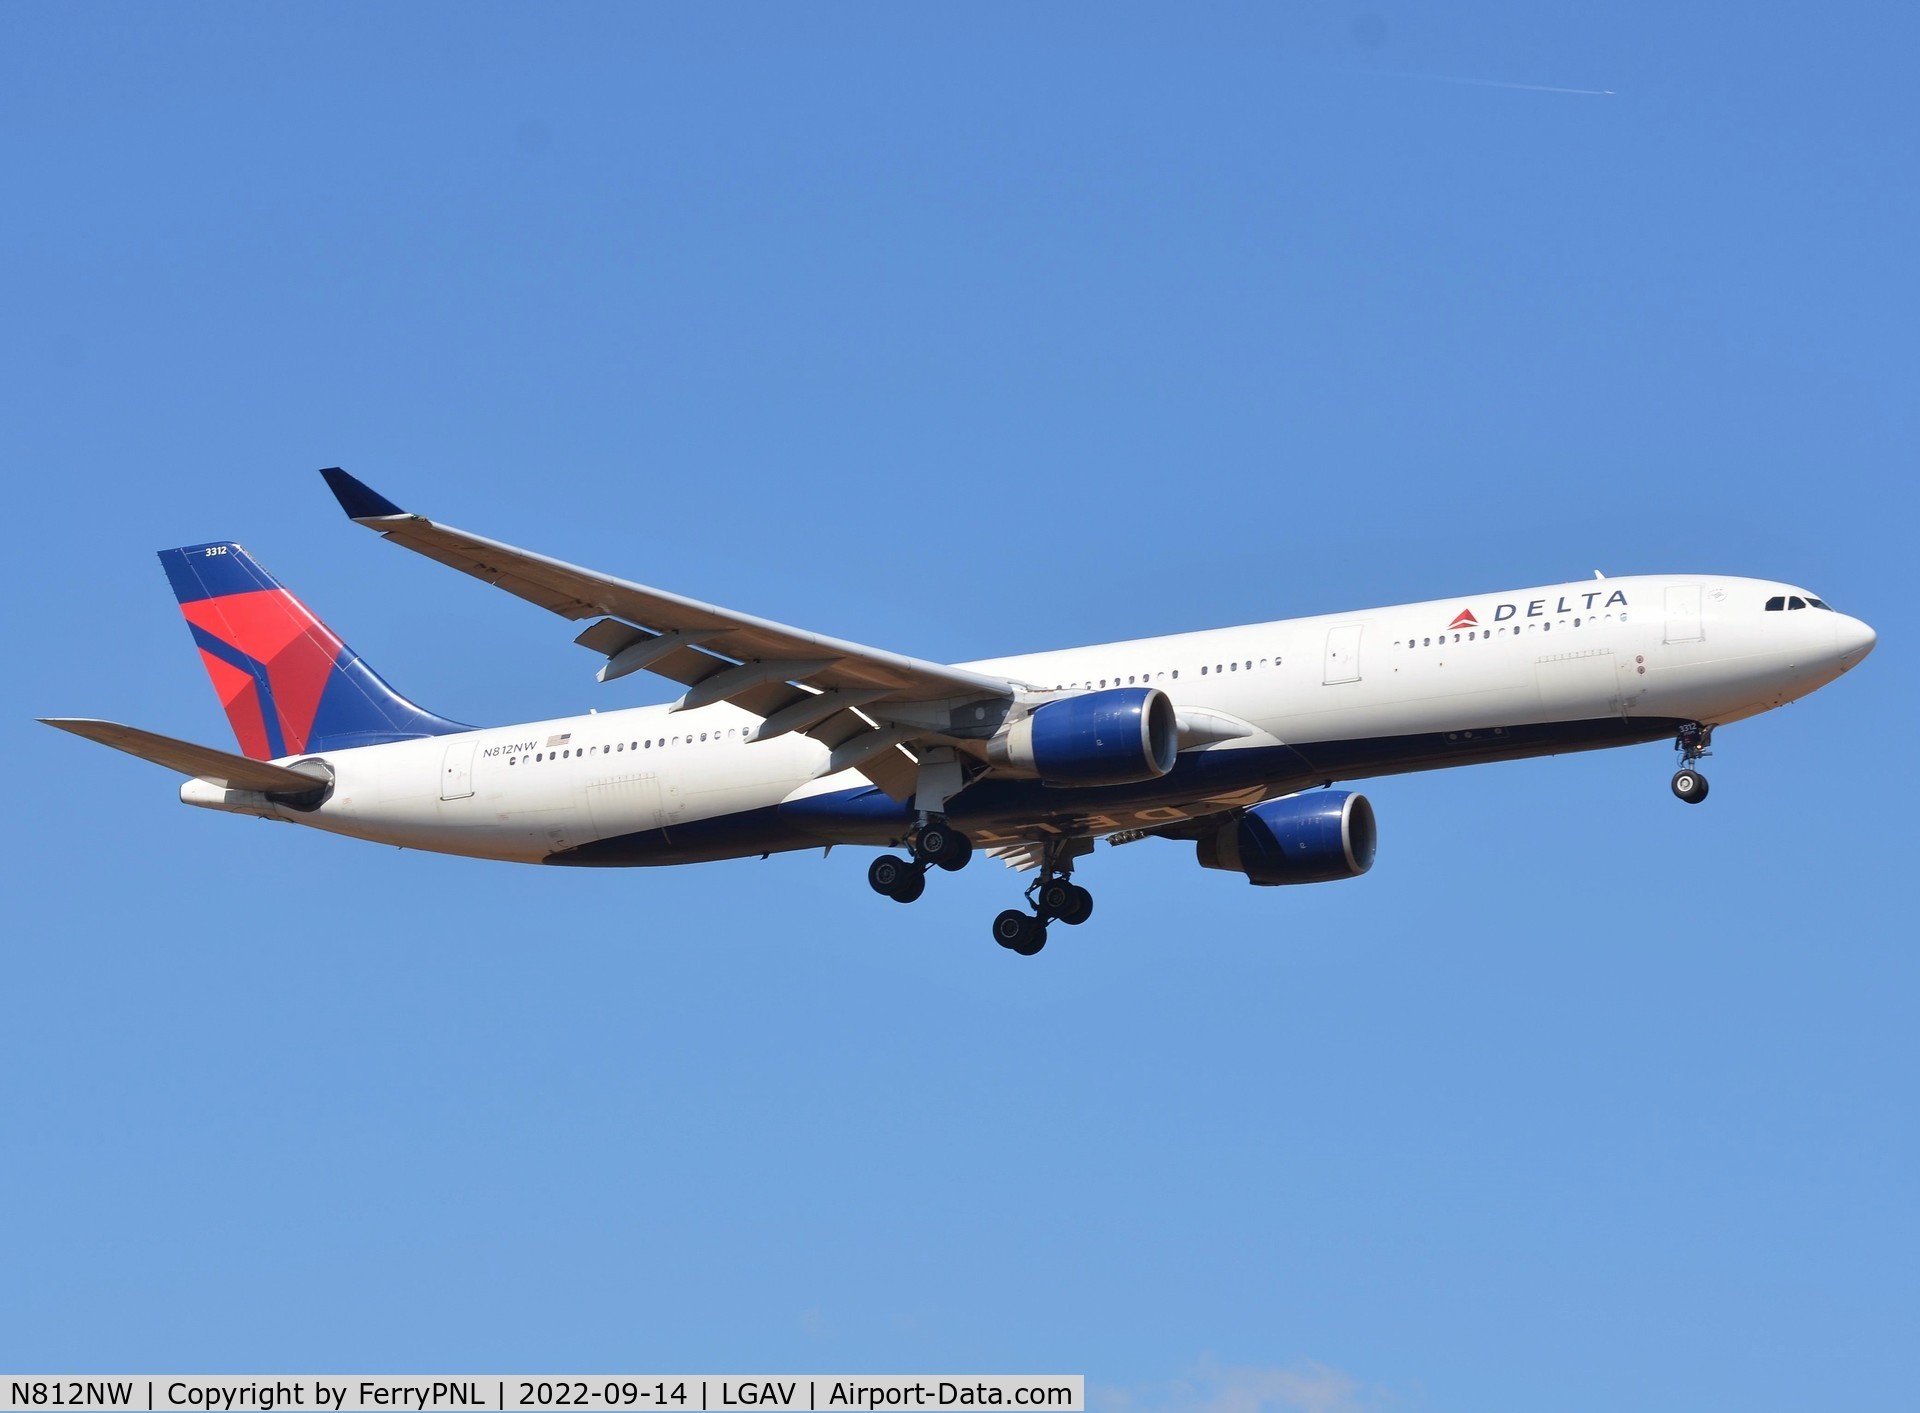 N812NW, 2006 Airbus A330-323 C/N 0784, Arrival of Delta A333